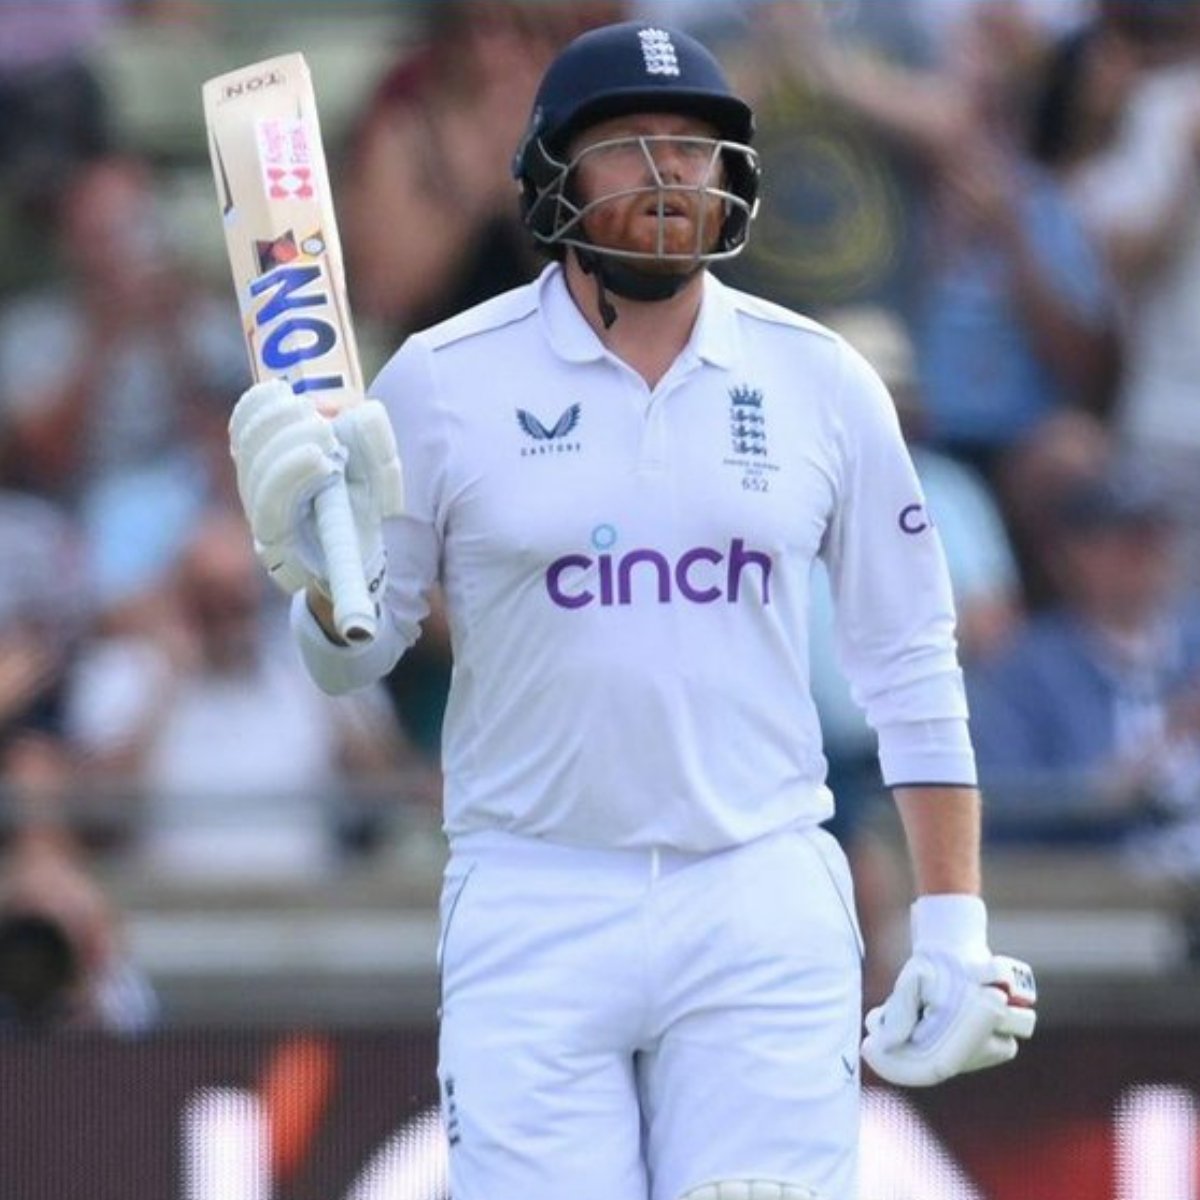 Fifty by Jonny Bairstow on Test return!

#Ashes2023 #JonnyBairstow #ENGvAUS